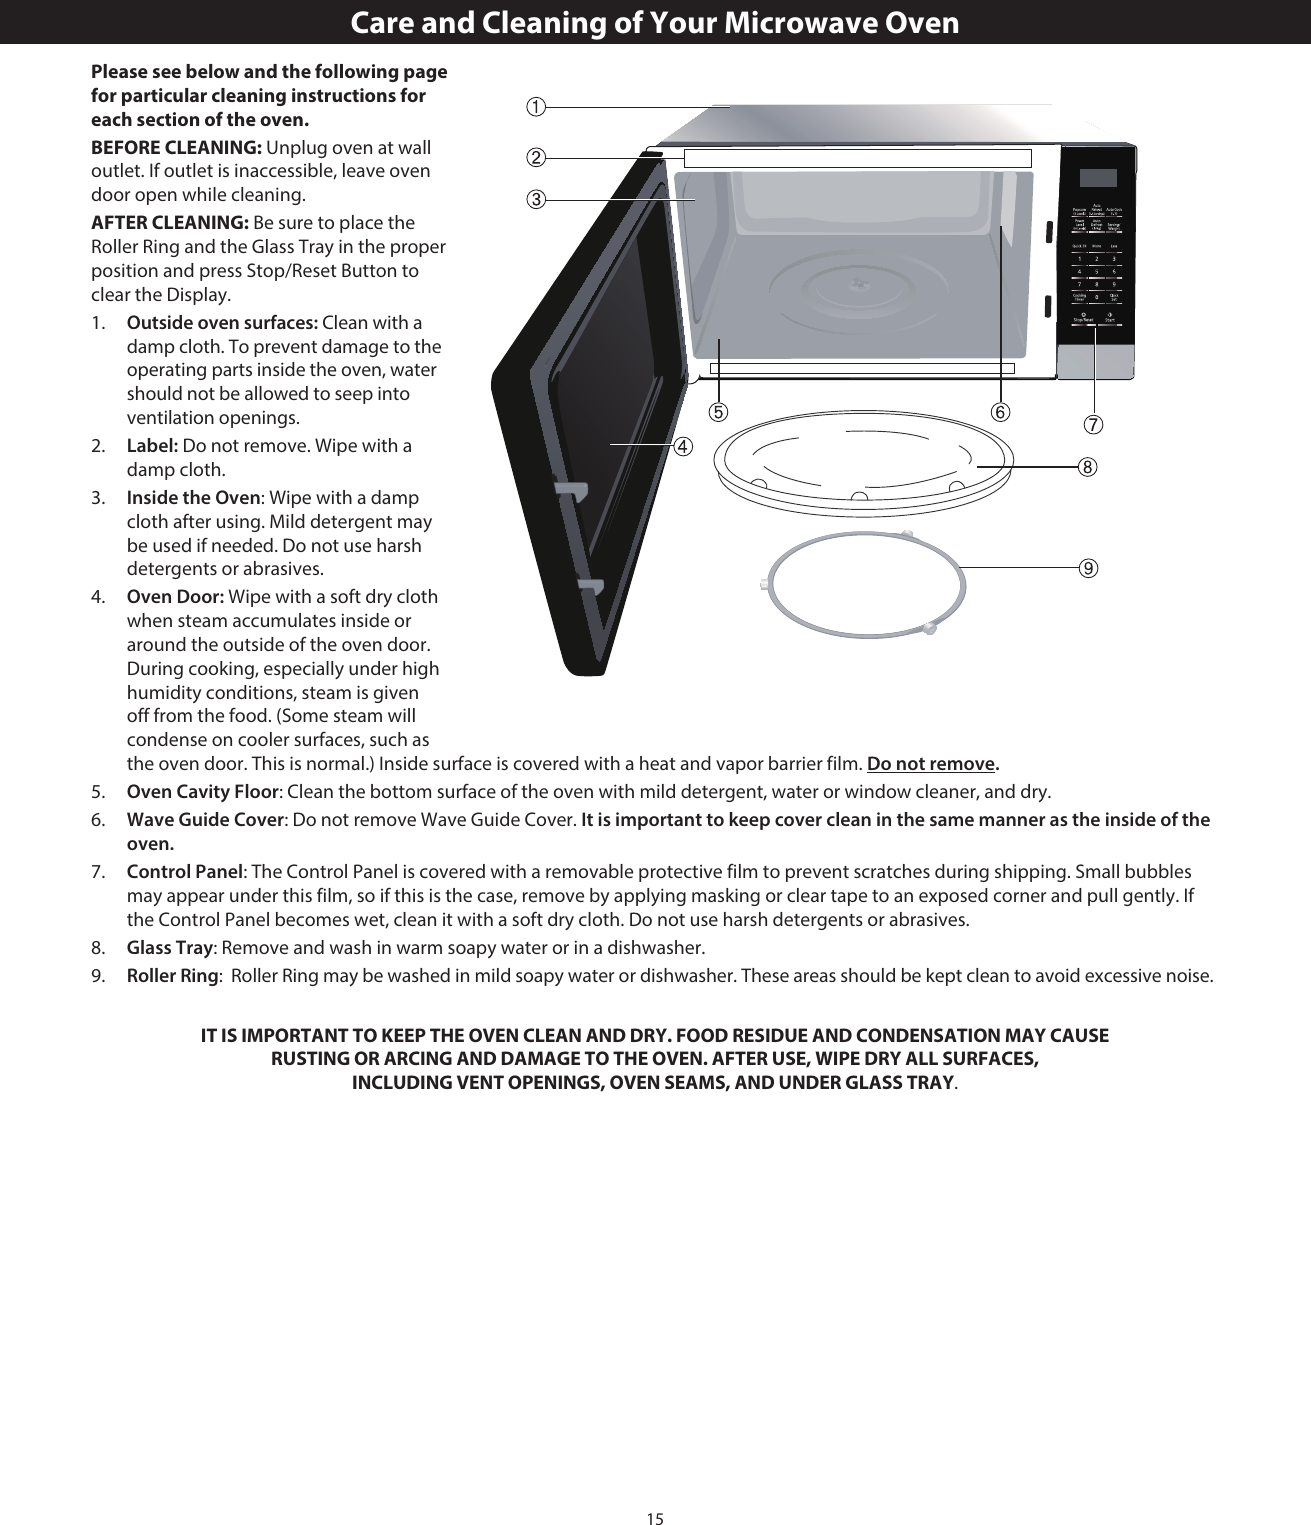 15Care and Cleaning of Your Microwave OvenPlease see below and the following page for particular cleaning instructions for each section of the oven.BEFORE CLEANING: Unplug oven at wall outlet. If outlet is inaccessible, leave oven door open while cleaning.AFTER CLEANING: Be sure to place the Roller Ring and the Glass Tray in the proper position and press Stop/Reset Button to clear the Display.1.  Outside oven surfaces: Clean with a damp cloth. To prevent damage to the operating parts inside the oven, water should not be allowed to seep into ventilation openings.2.  Label: Do not remove. Wipe with a damp cloth.3.  Inside the Oven: Wipe with a damp cloth after using. Mild detergent may be used if needed. Do not use harsh detergents or abrasives.4.  Oven Door: Wipe with a soft dry cloth when steam accumulates inside or around the outside of the oven door. During cooking, especially under high humidity conditions, steam is given off from the food. (Some steam will condense on cooler surfaces, such as the oven door. This is normal.) Inside surface is covered with a heat and vapor barrier film. Do not remove.5.  Oven Cavity Floor: Clean the bottom surface of the oven with mild detergent, water or window cleaner, and dry.6.  Wave Guide Cover: Do not remove Wave Guide Cover. It is important to keep cover clean in the same manner as the inside of the oven. 7.  Control Panel: The Control Panel is covered with a removable protective film to prevent scratches during shipping. Small bubbles may appear under this film, so if this is the case, remove by applying masking or clear tape to an exposed corner and pull gently. If the Control Panel becomes wet, clean it with a soft dry cloth. Do not use harsh detergents or abrasives. 8.  Glass Tray: Remove and wash in warm soapy water or in a dishwasher.9.  Roller Ring:  Roller Ring may be washed in mild soapy water or dishwasher. These areas should be kept clean to avoid excessive noise.IT IS IMPORTANT TO KEEP THE OVEN CLEAN AND DRY. FOOD RESIDUE AND CONDENSATION MAY CAUSE RUSTING OR ARCING AND DAMAGE TO THE OVEN. AFTER USE, WIPE DRY ALL SURFACES, INCLUDING VENT OPENINGS, OVEN SEAMS, AND UNDER GLASS TRAY.